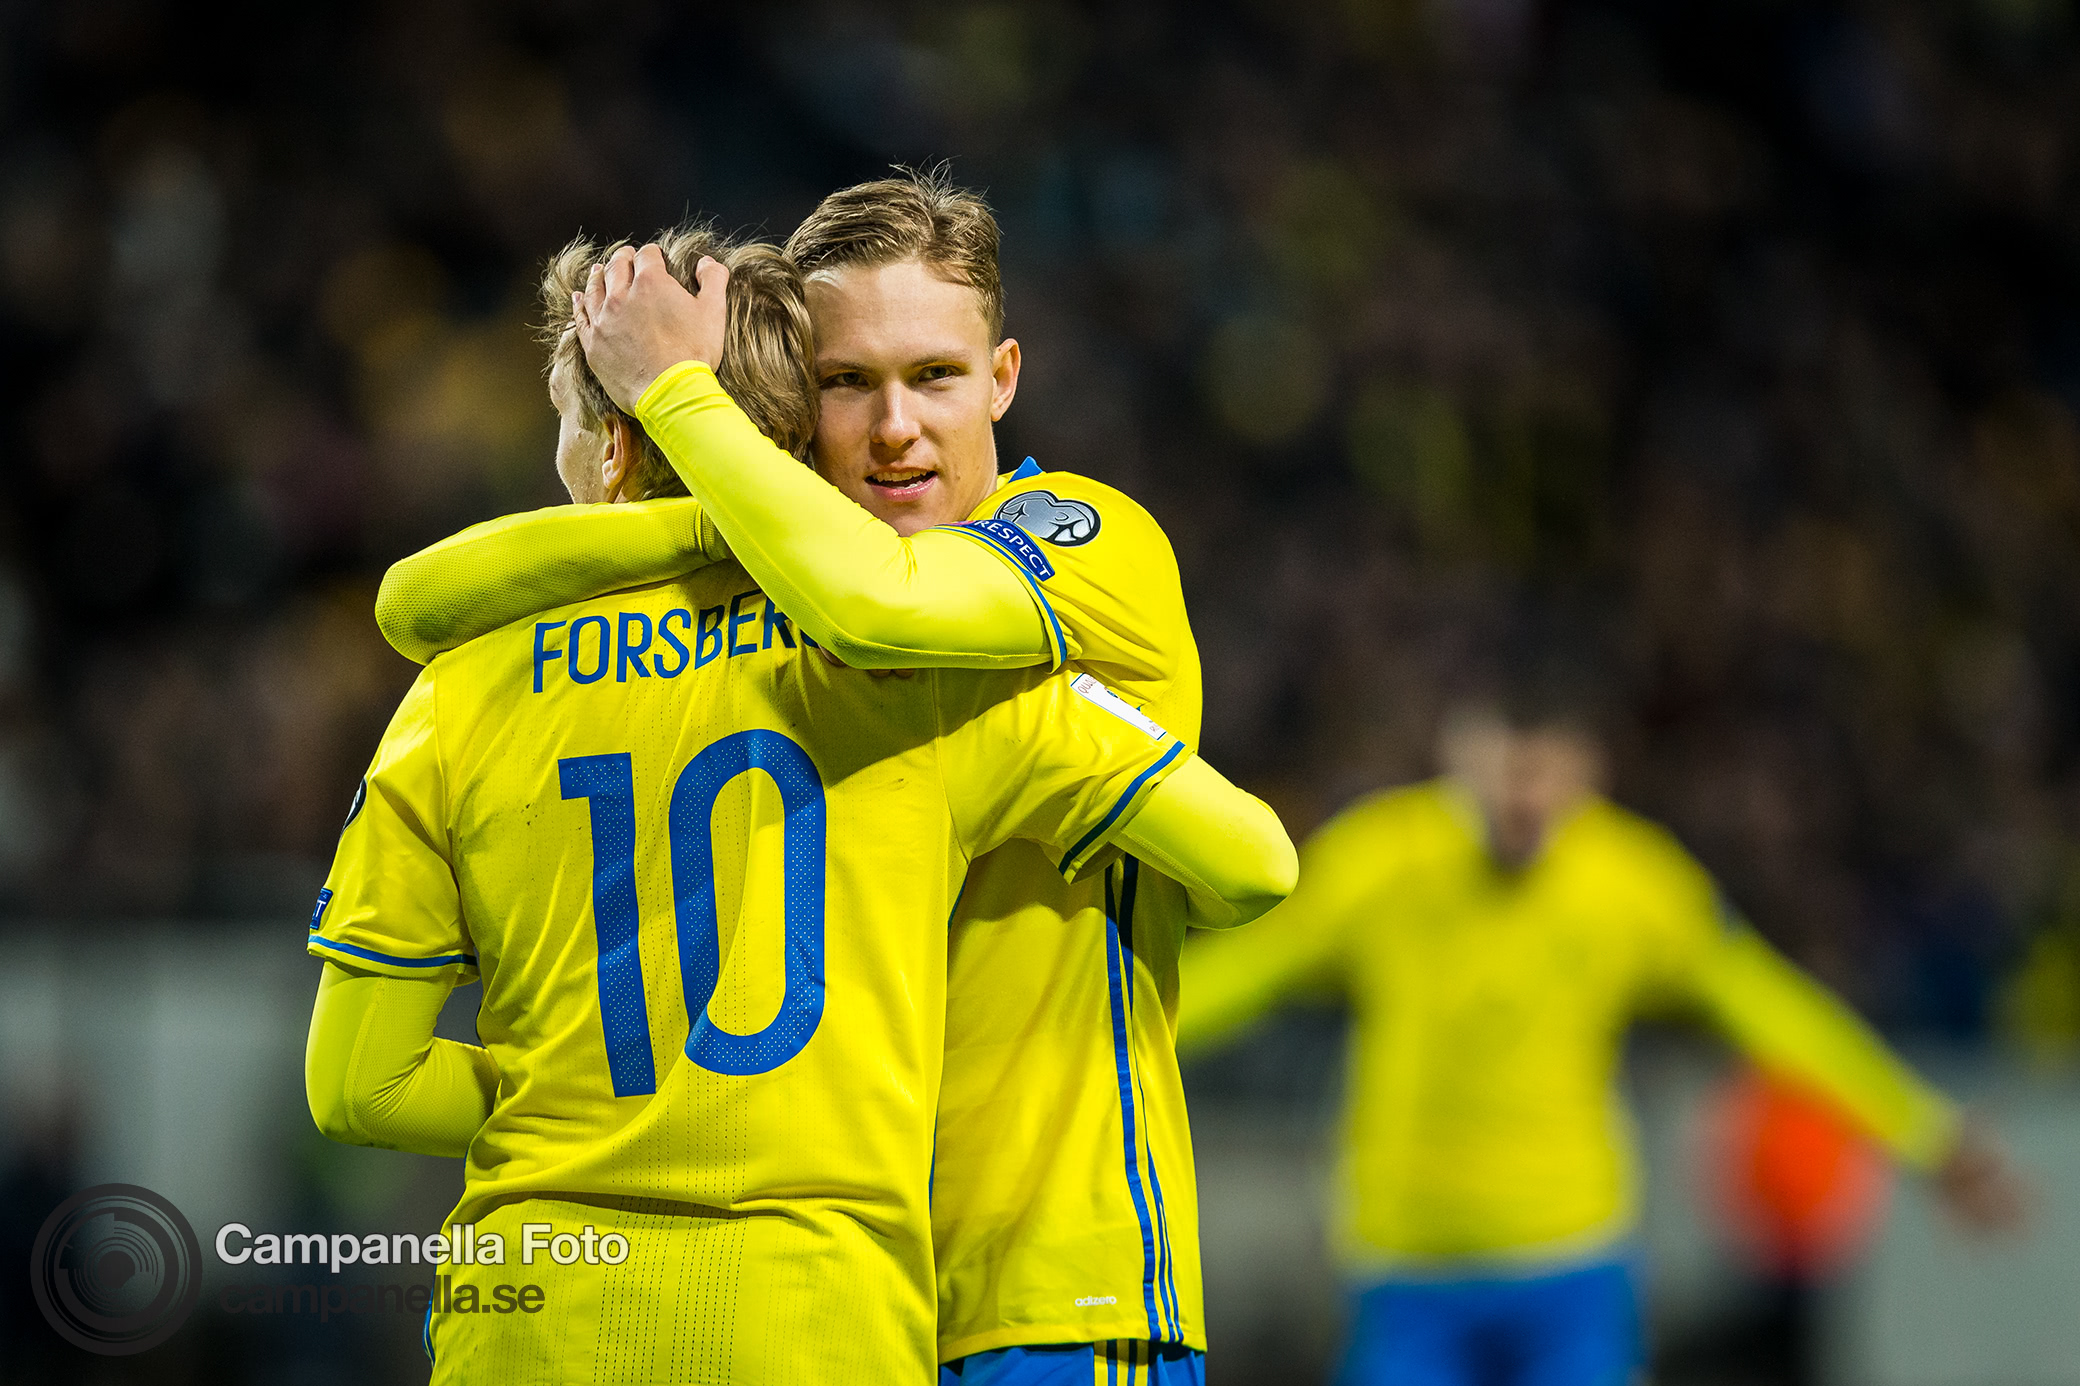 Sweden easily disposes Belarus in 4-0 victory - Michael Campanella Photography